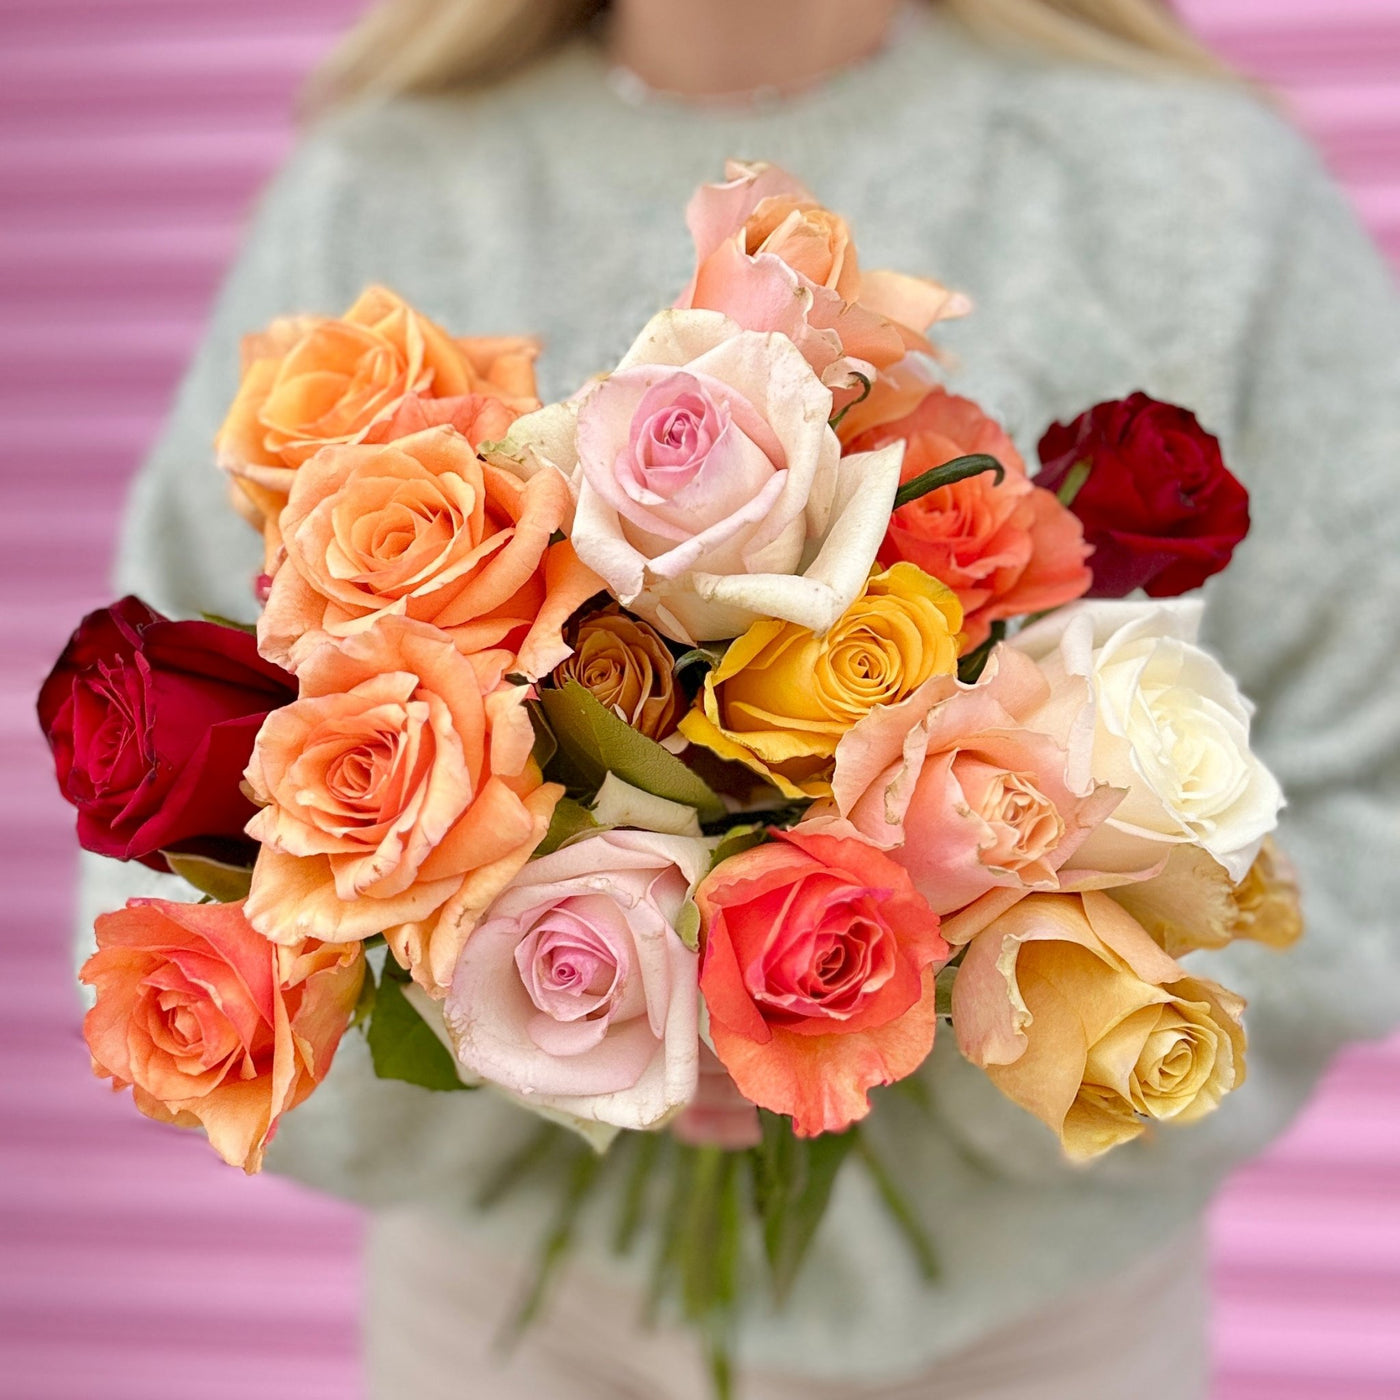 The Most Spectacular Autumnal Flowers for Your Bouquet - The Green Room Flower Company